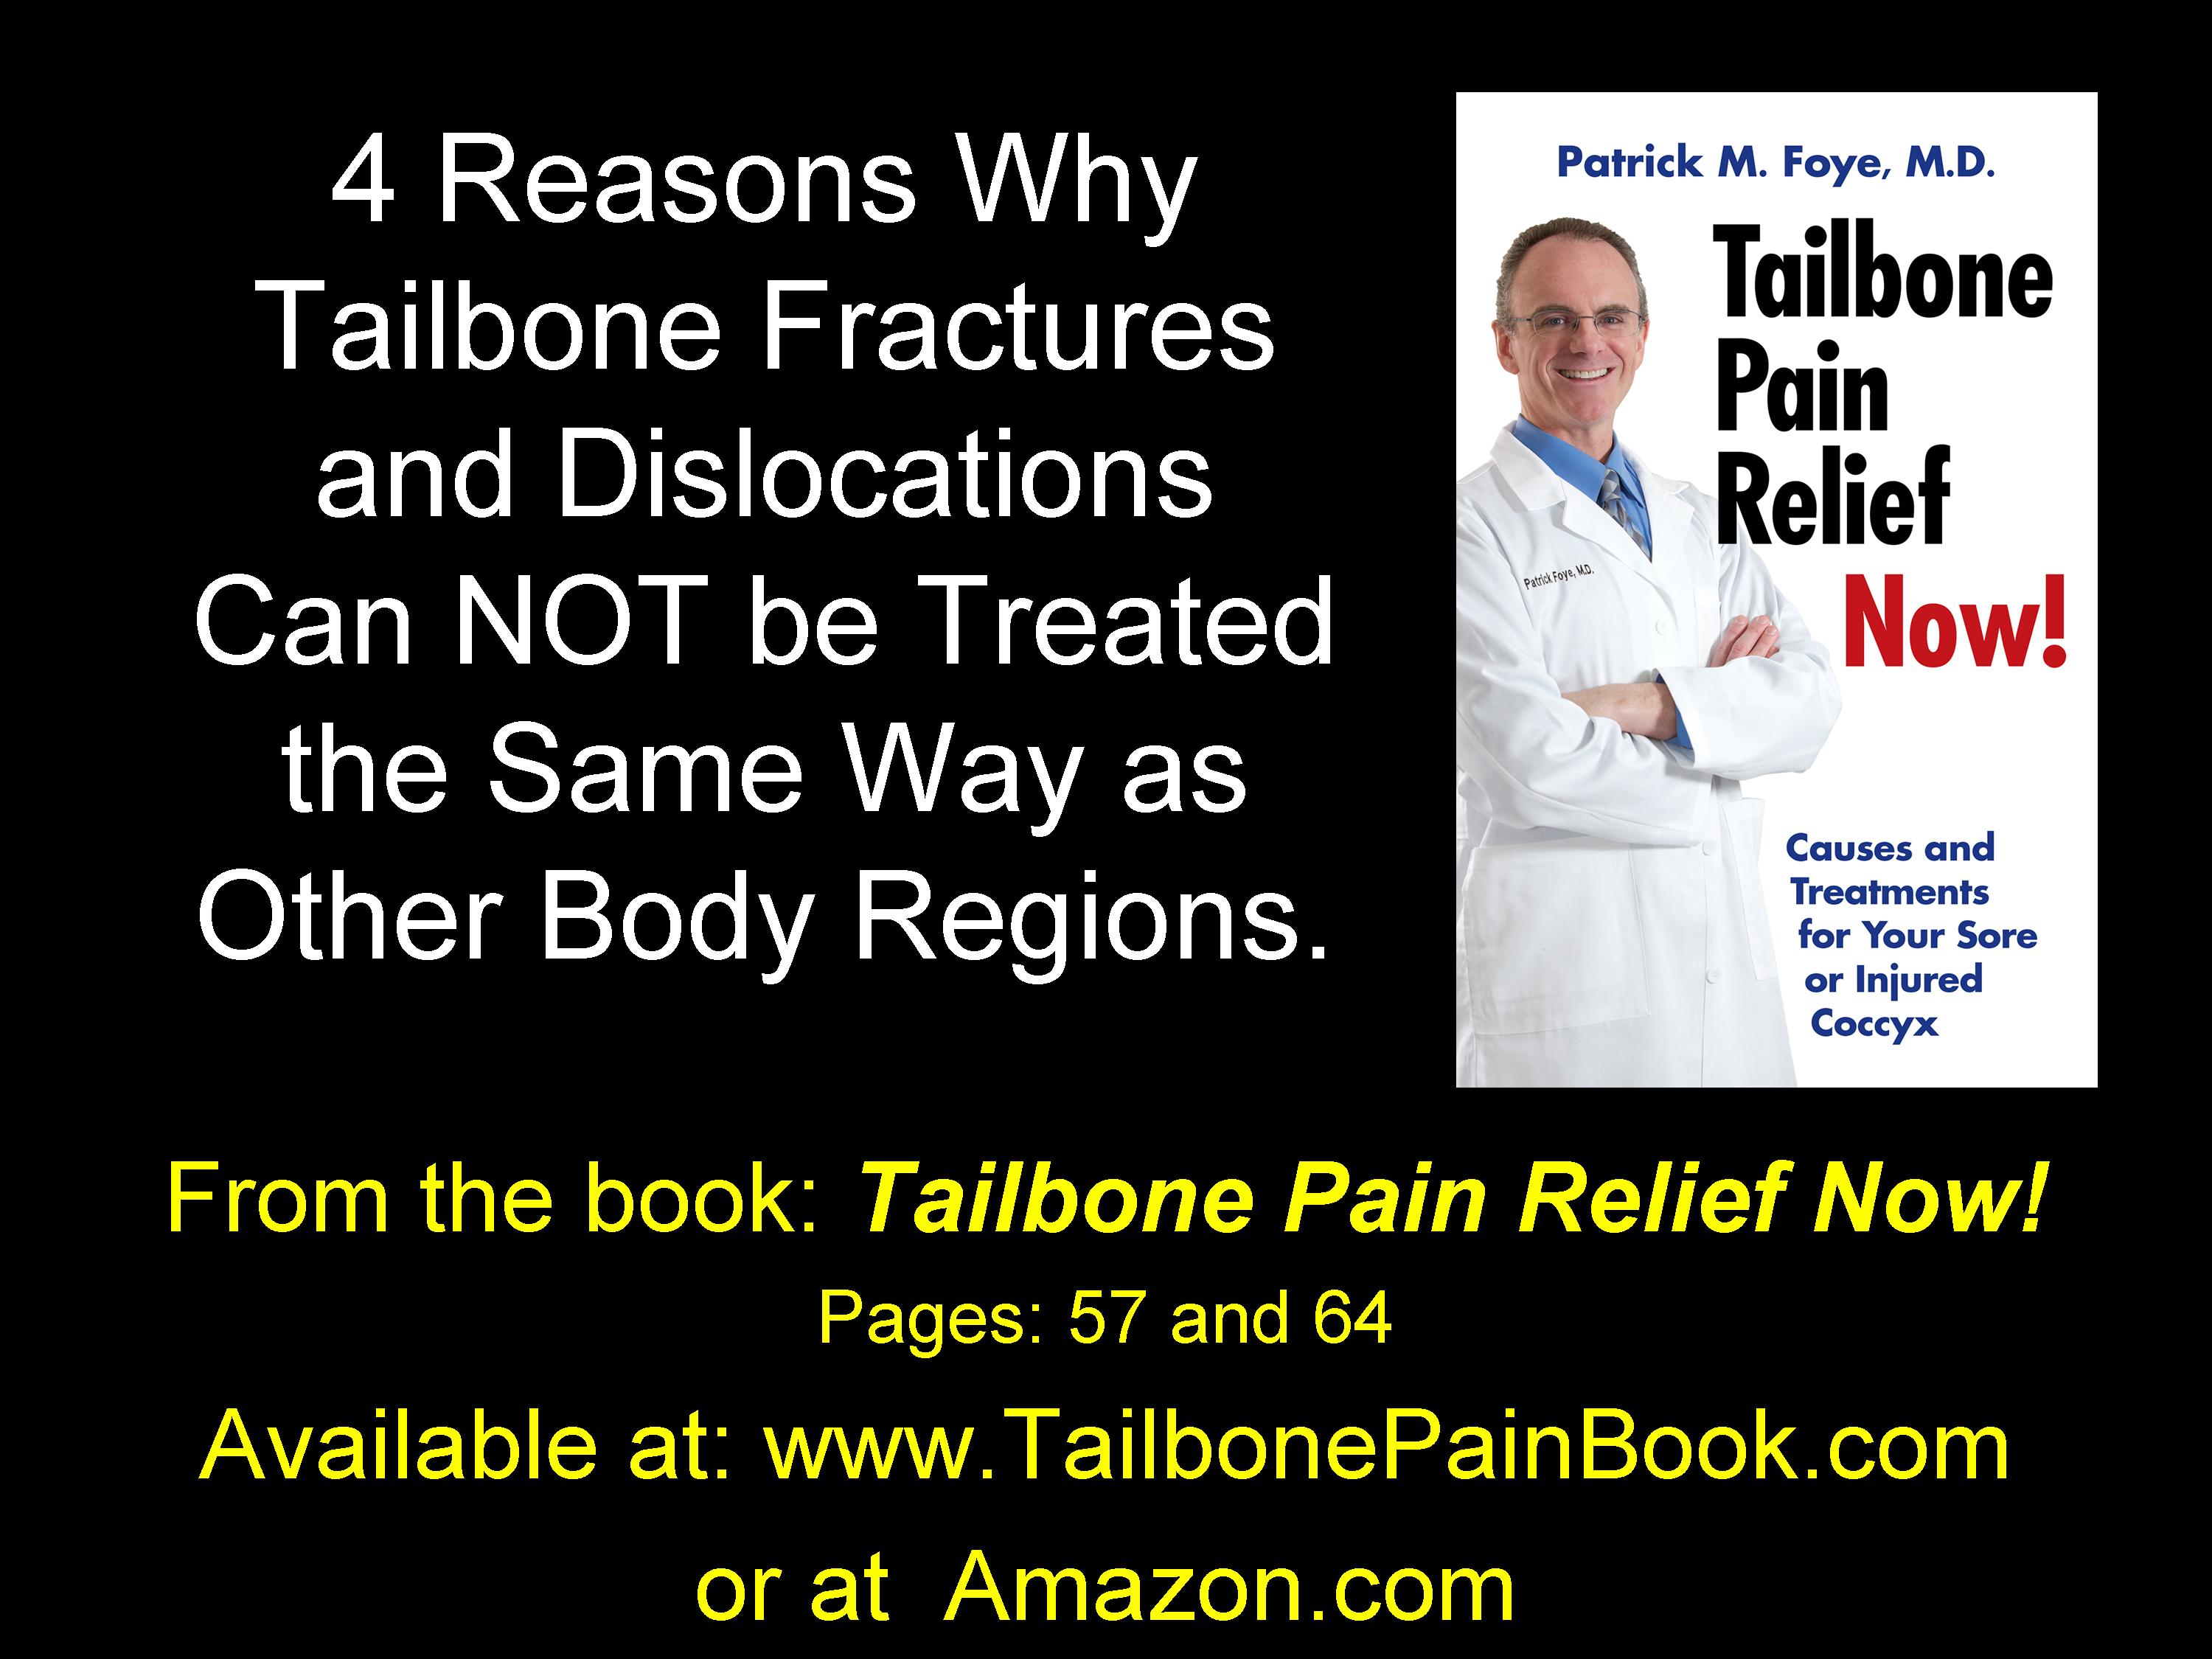 https://tailbonedoctor.com/wp-content/uploads/2017/05/4-Reasons-Tailbone-Pain-is-treated-Differently.jpg